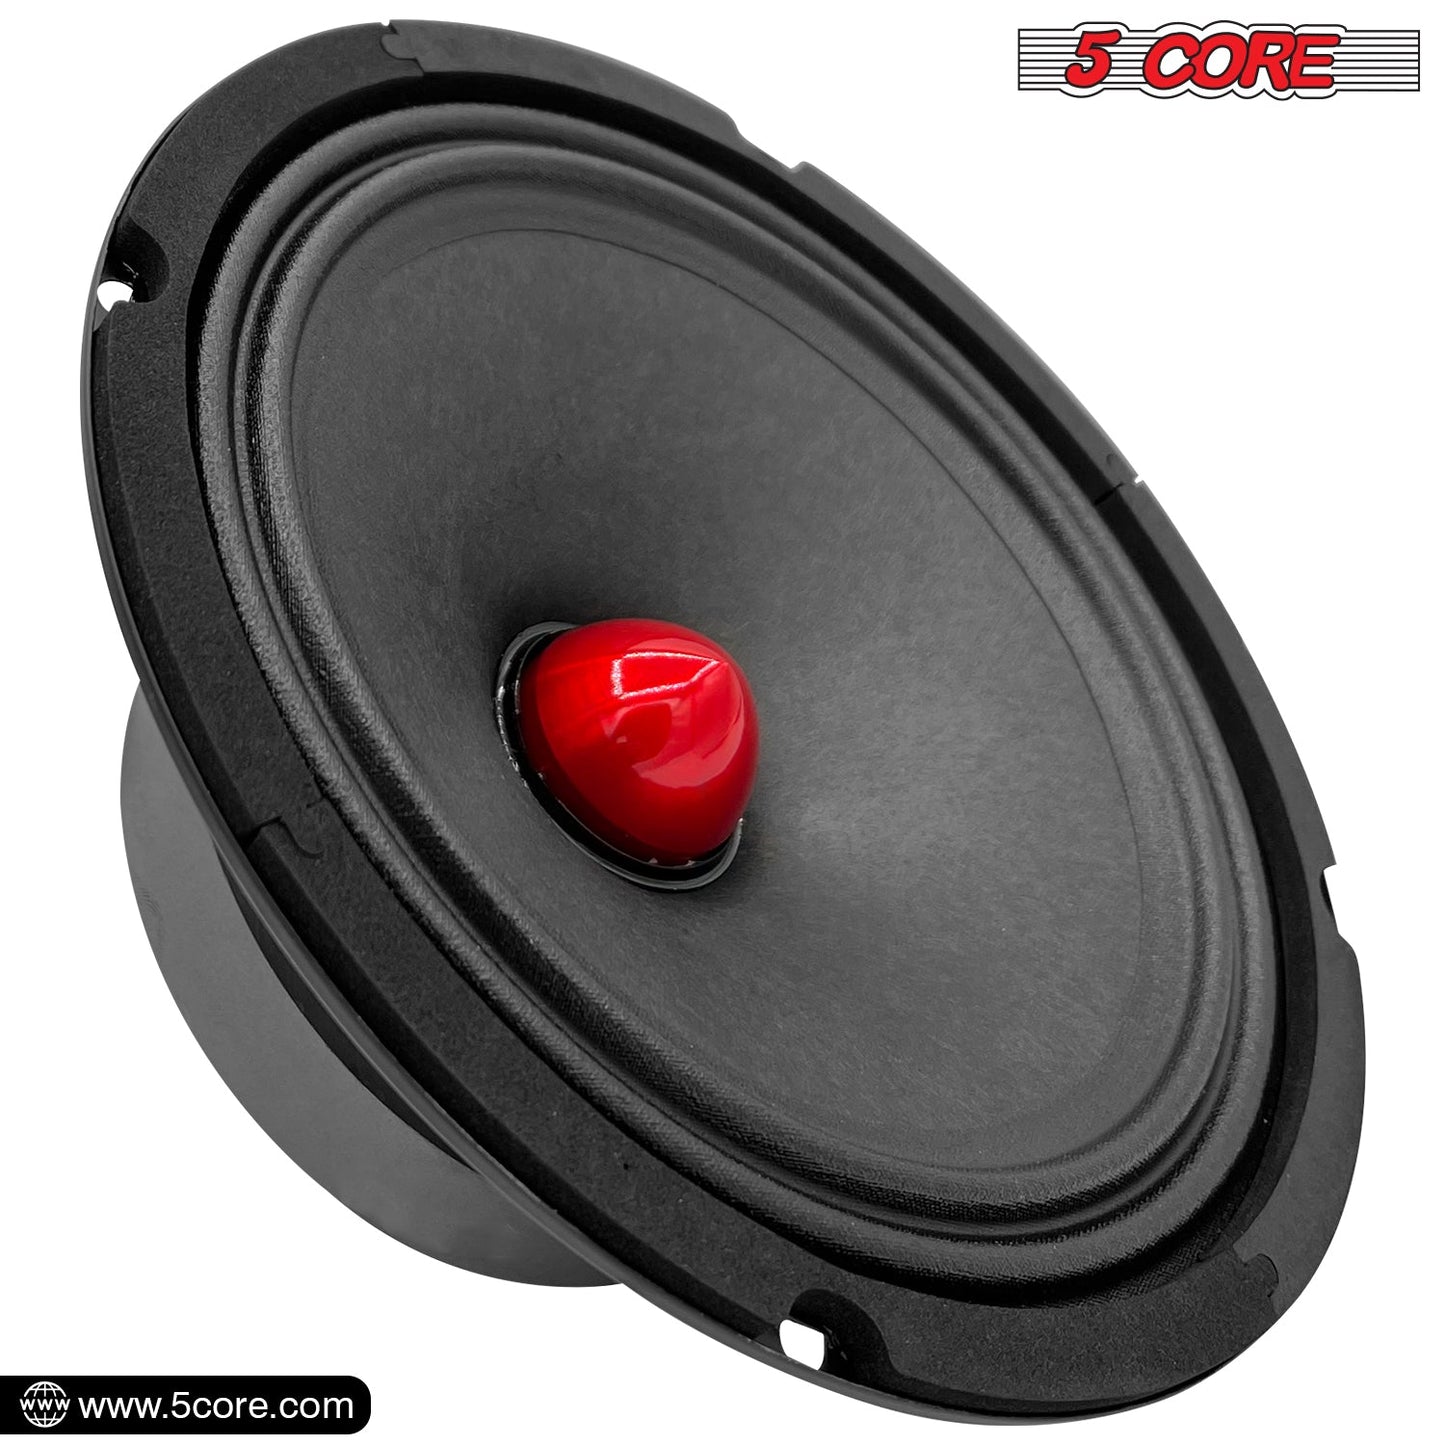 5 Core 8" Car Audio Speakers with Bullet 580 W 4 Ohm Mid-Range